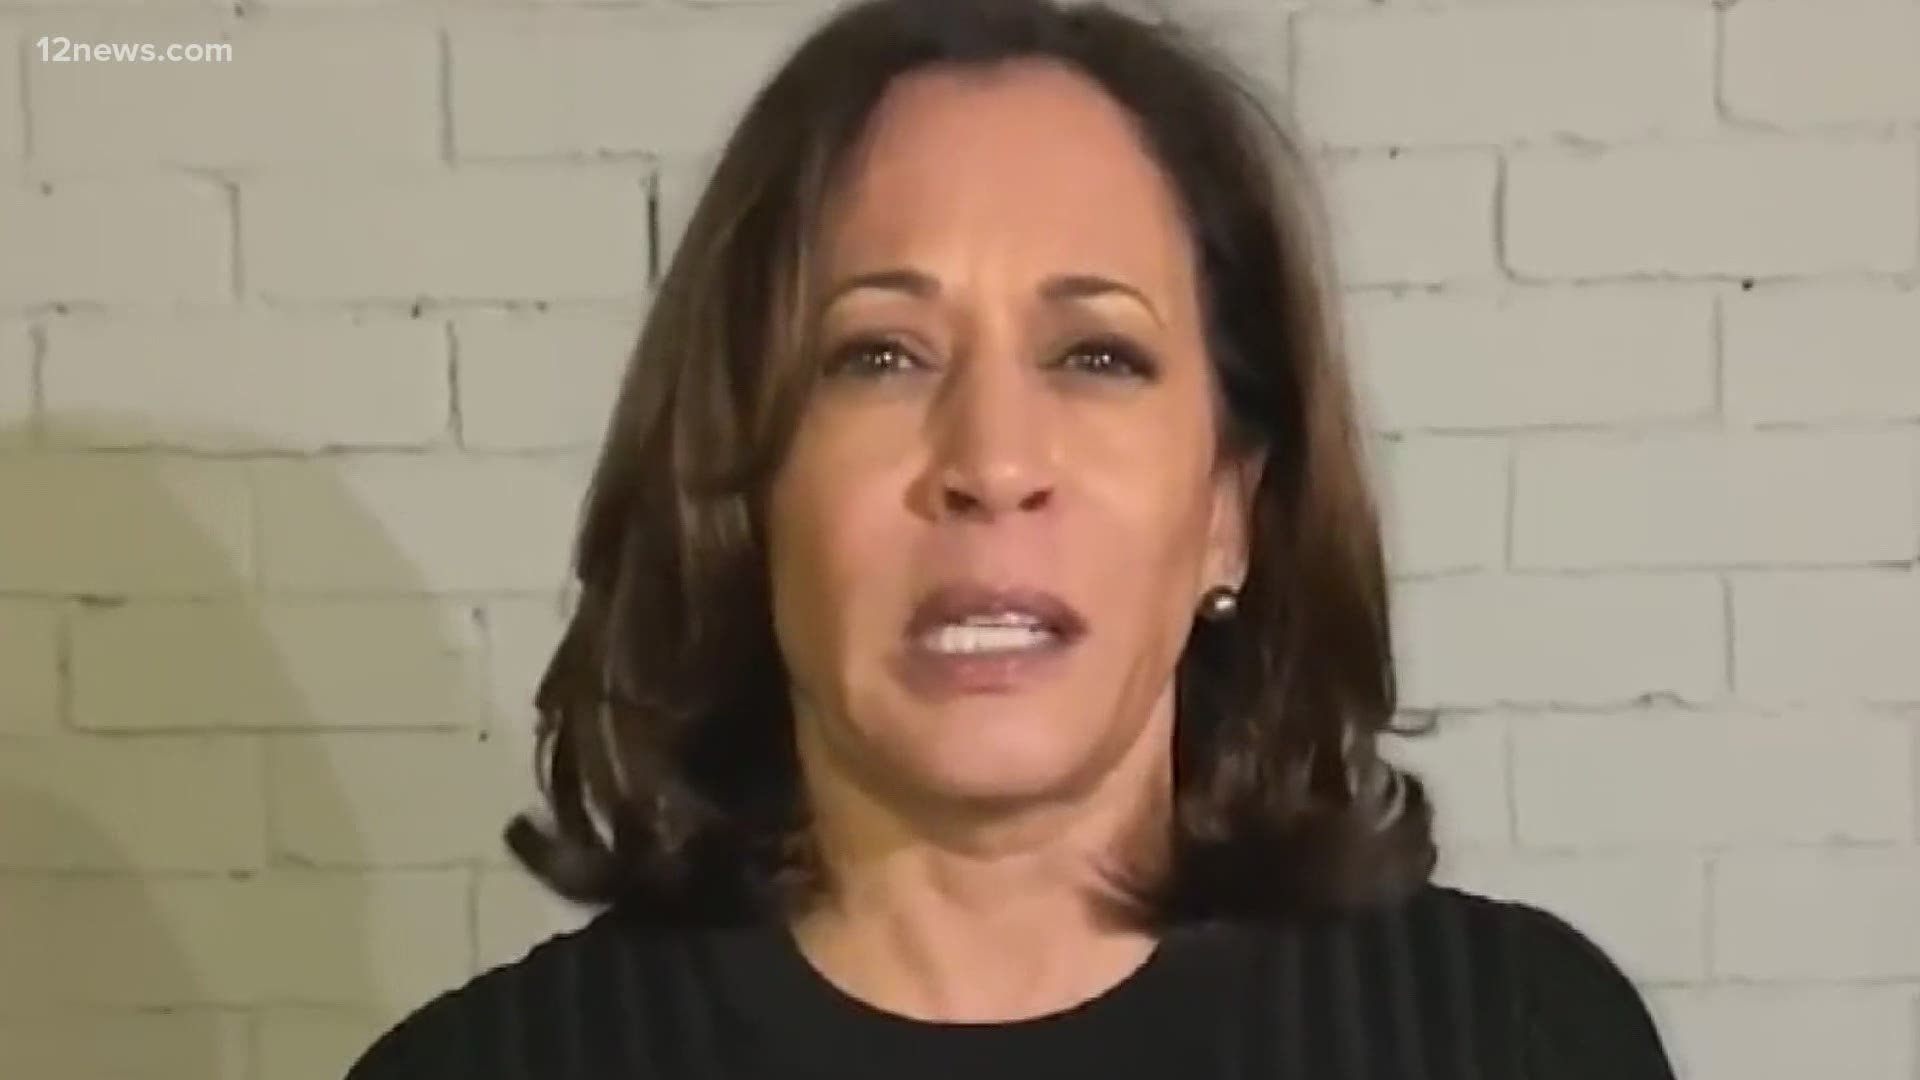 Arizona is a key battleground state in the upcoming general election, and the selection of Kamala Harris may play an important role this November.